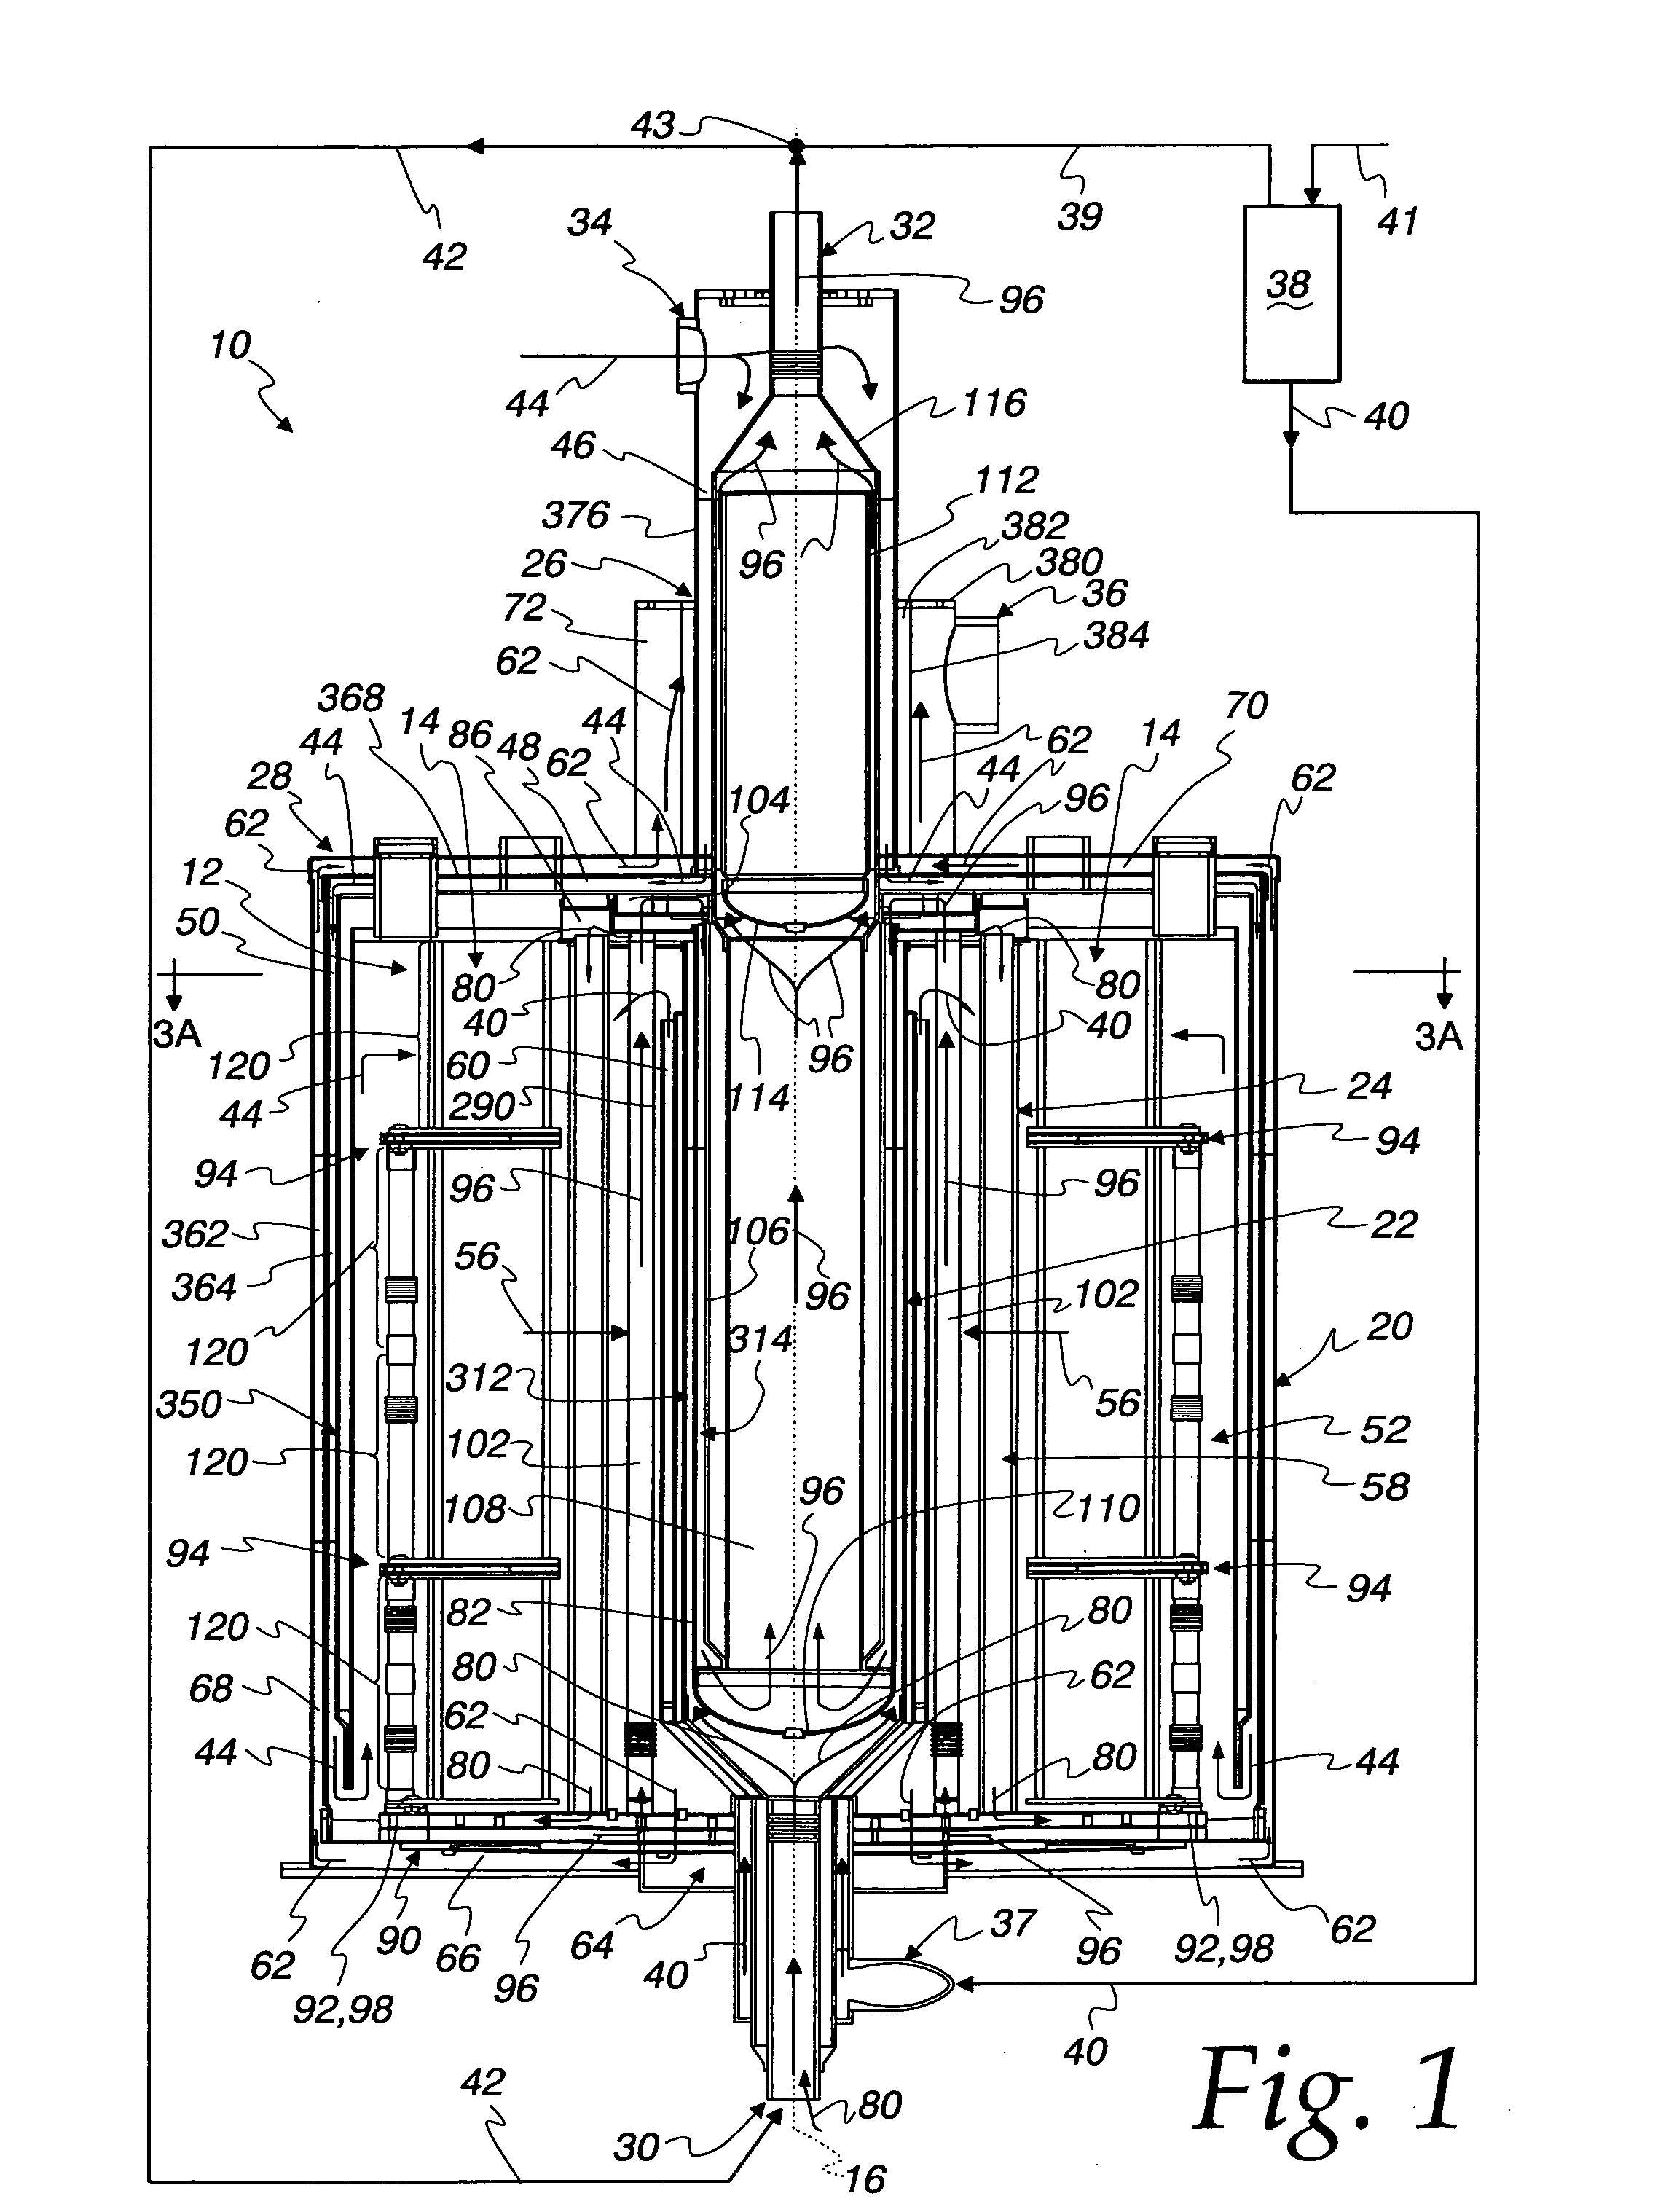 Integrated solid oxide fuel cell and fuel processor